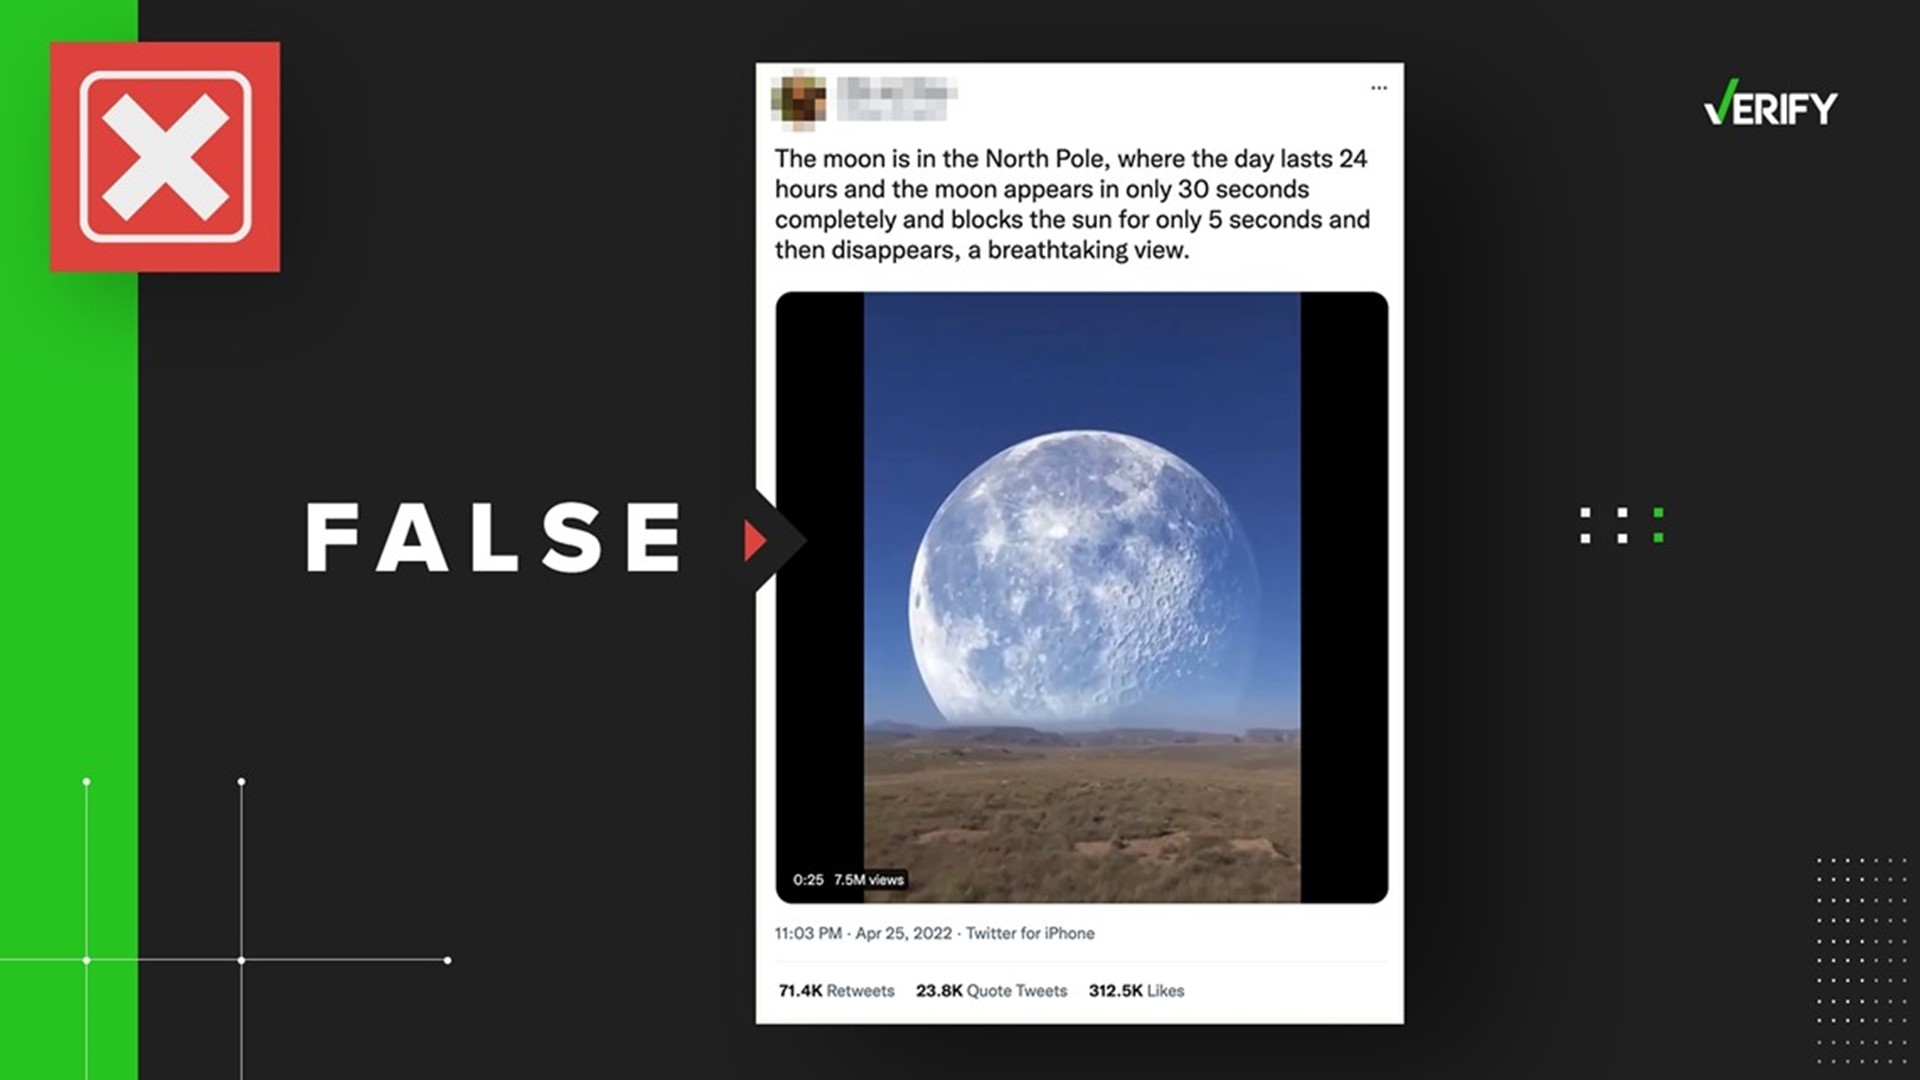 A viral video created with computer graphics claims to be a real depiction of the moon rising and setting at the North Pole.